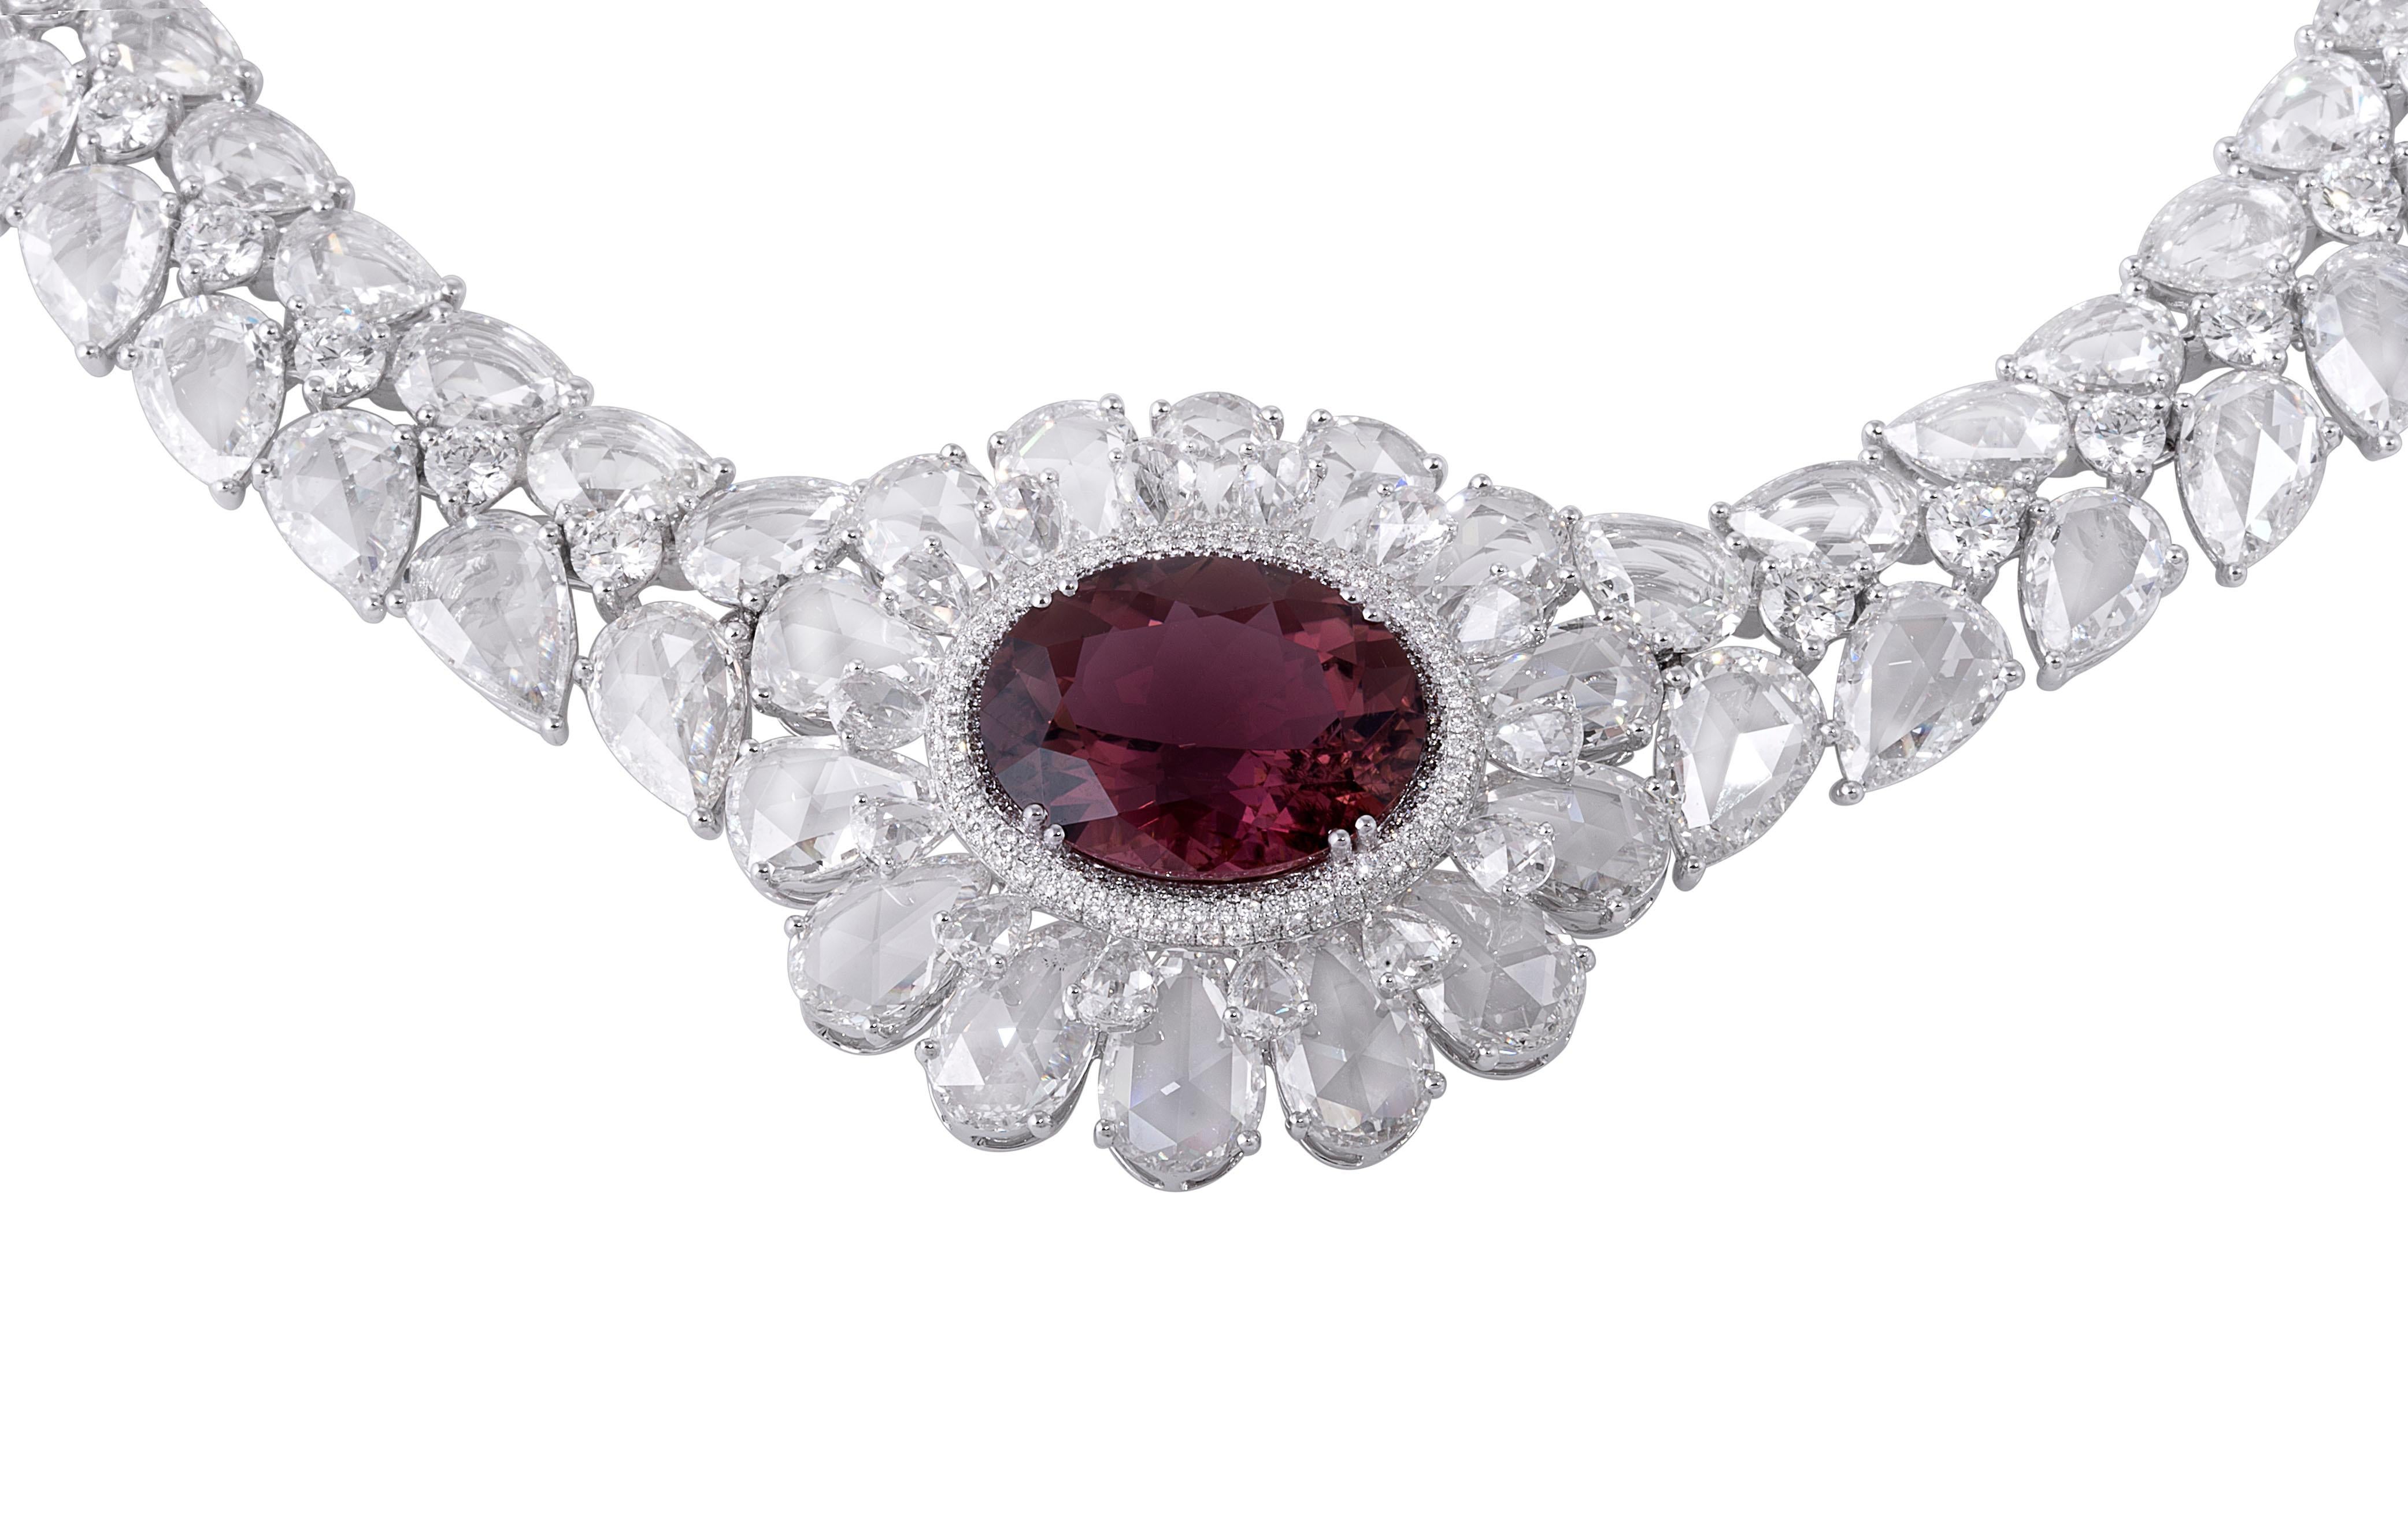 Enveloped in pear-shaped rose cut diamonds, sits a 9.08ct deep, red-hued rubellite, forming one of the most iconic pieces crafted by Rarever. 
A belt full of rose and brilliant-cut diamonds follow the central floral motif. This 18-karat gold